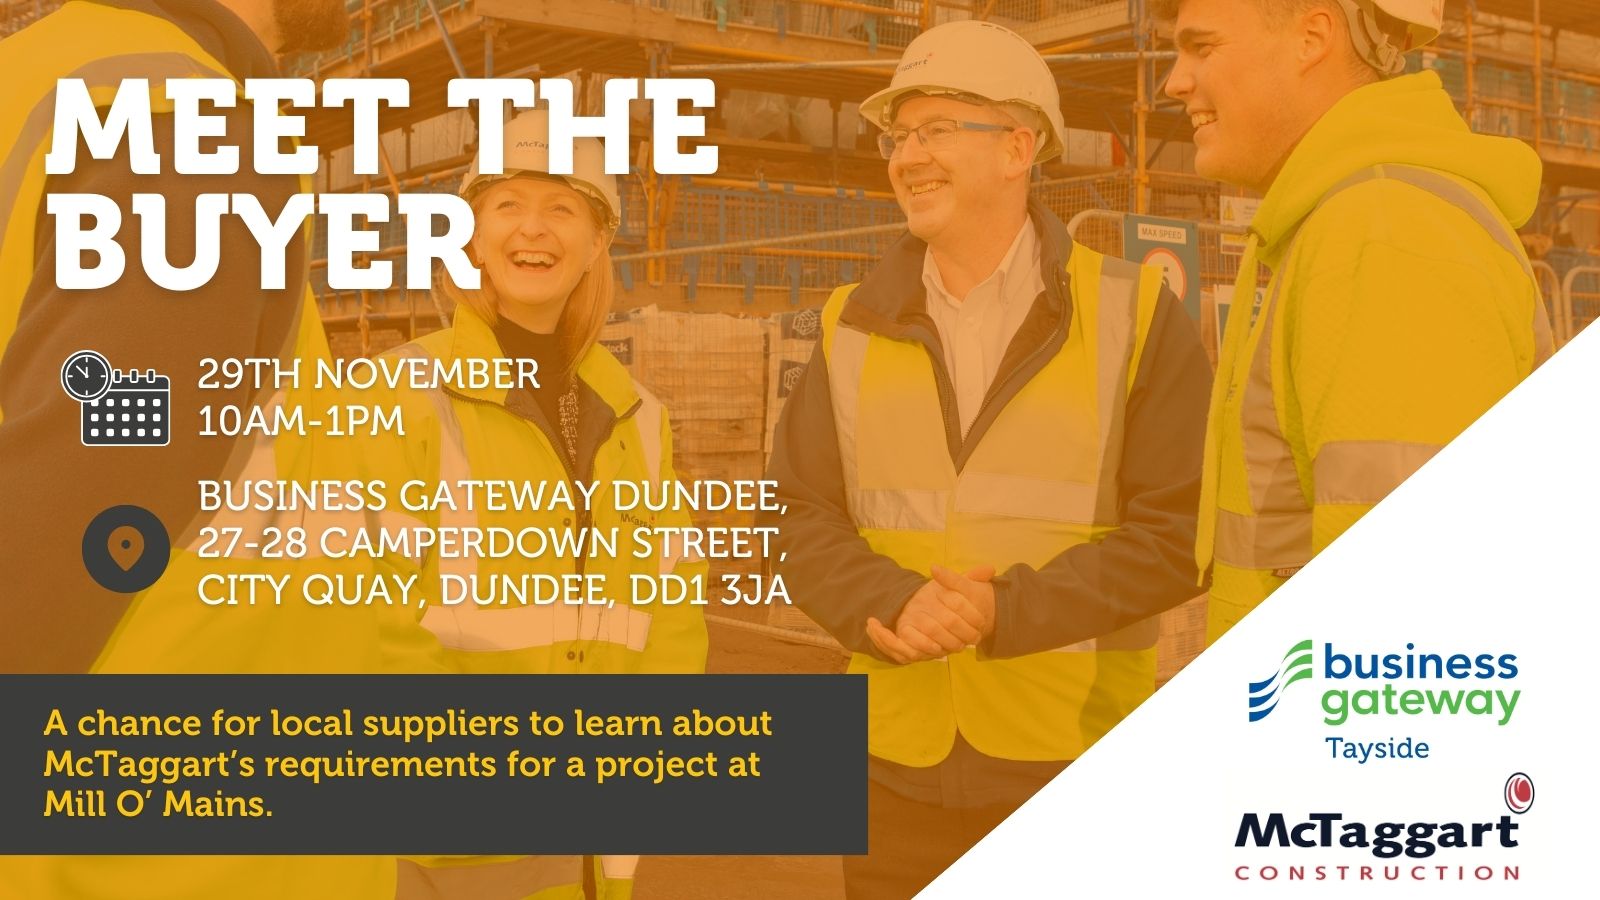 McTaggart to host ‘Meet the buyer’ event in Dundee